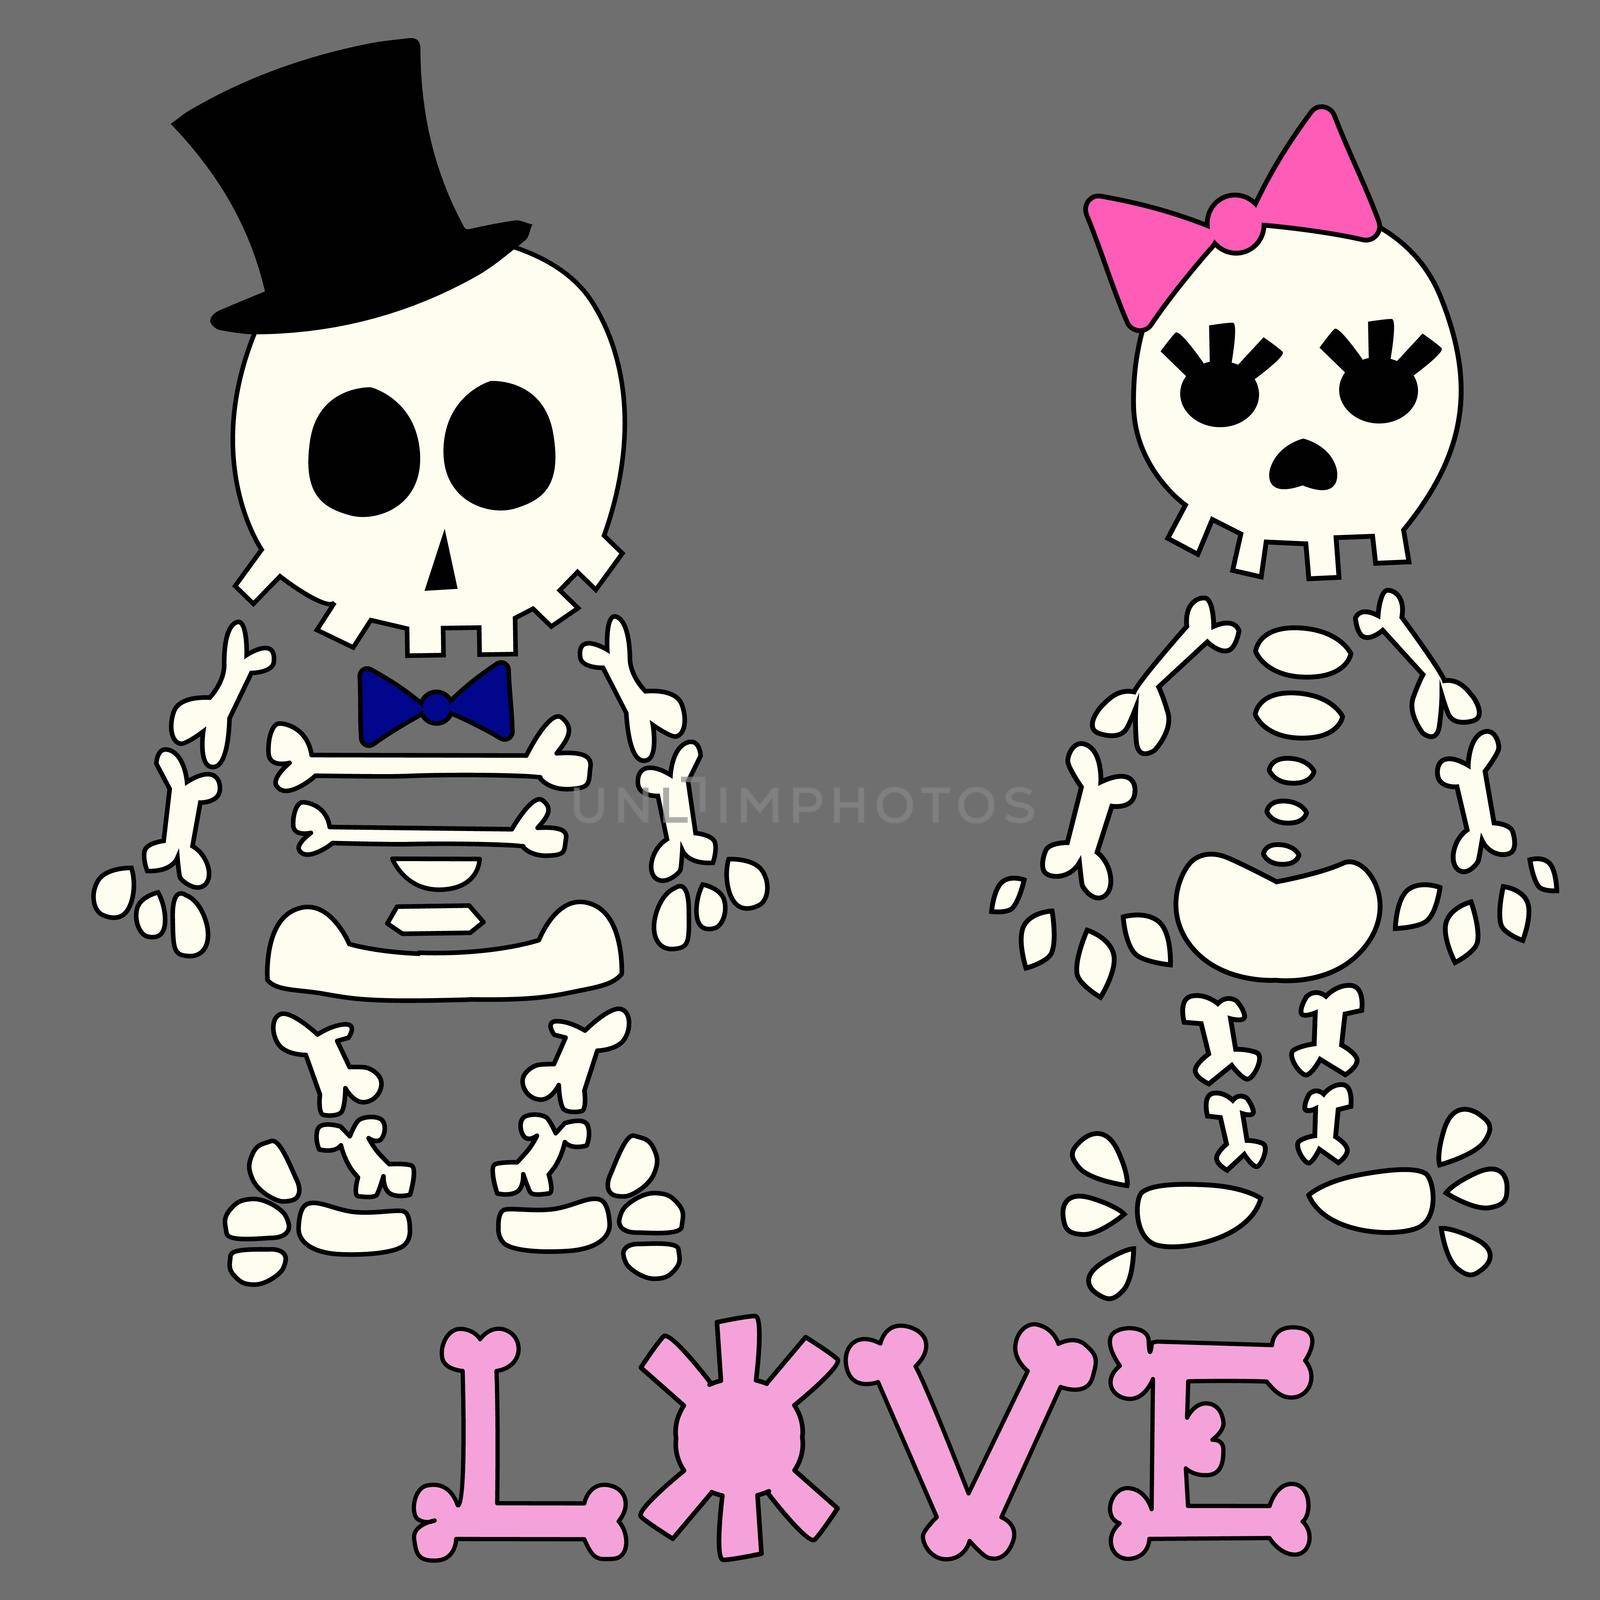 Funny postcard with cute skeletons. by biruzza